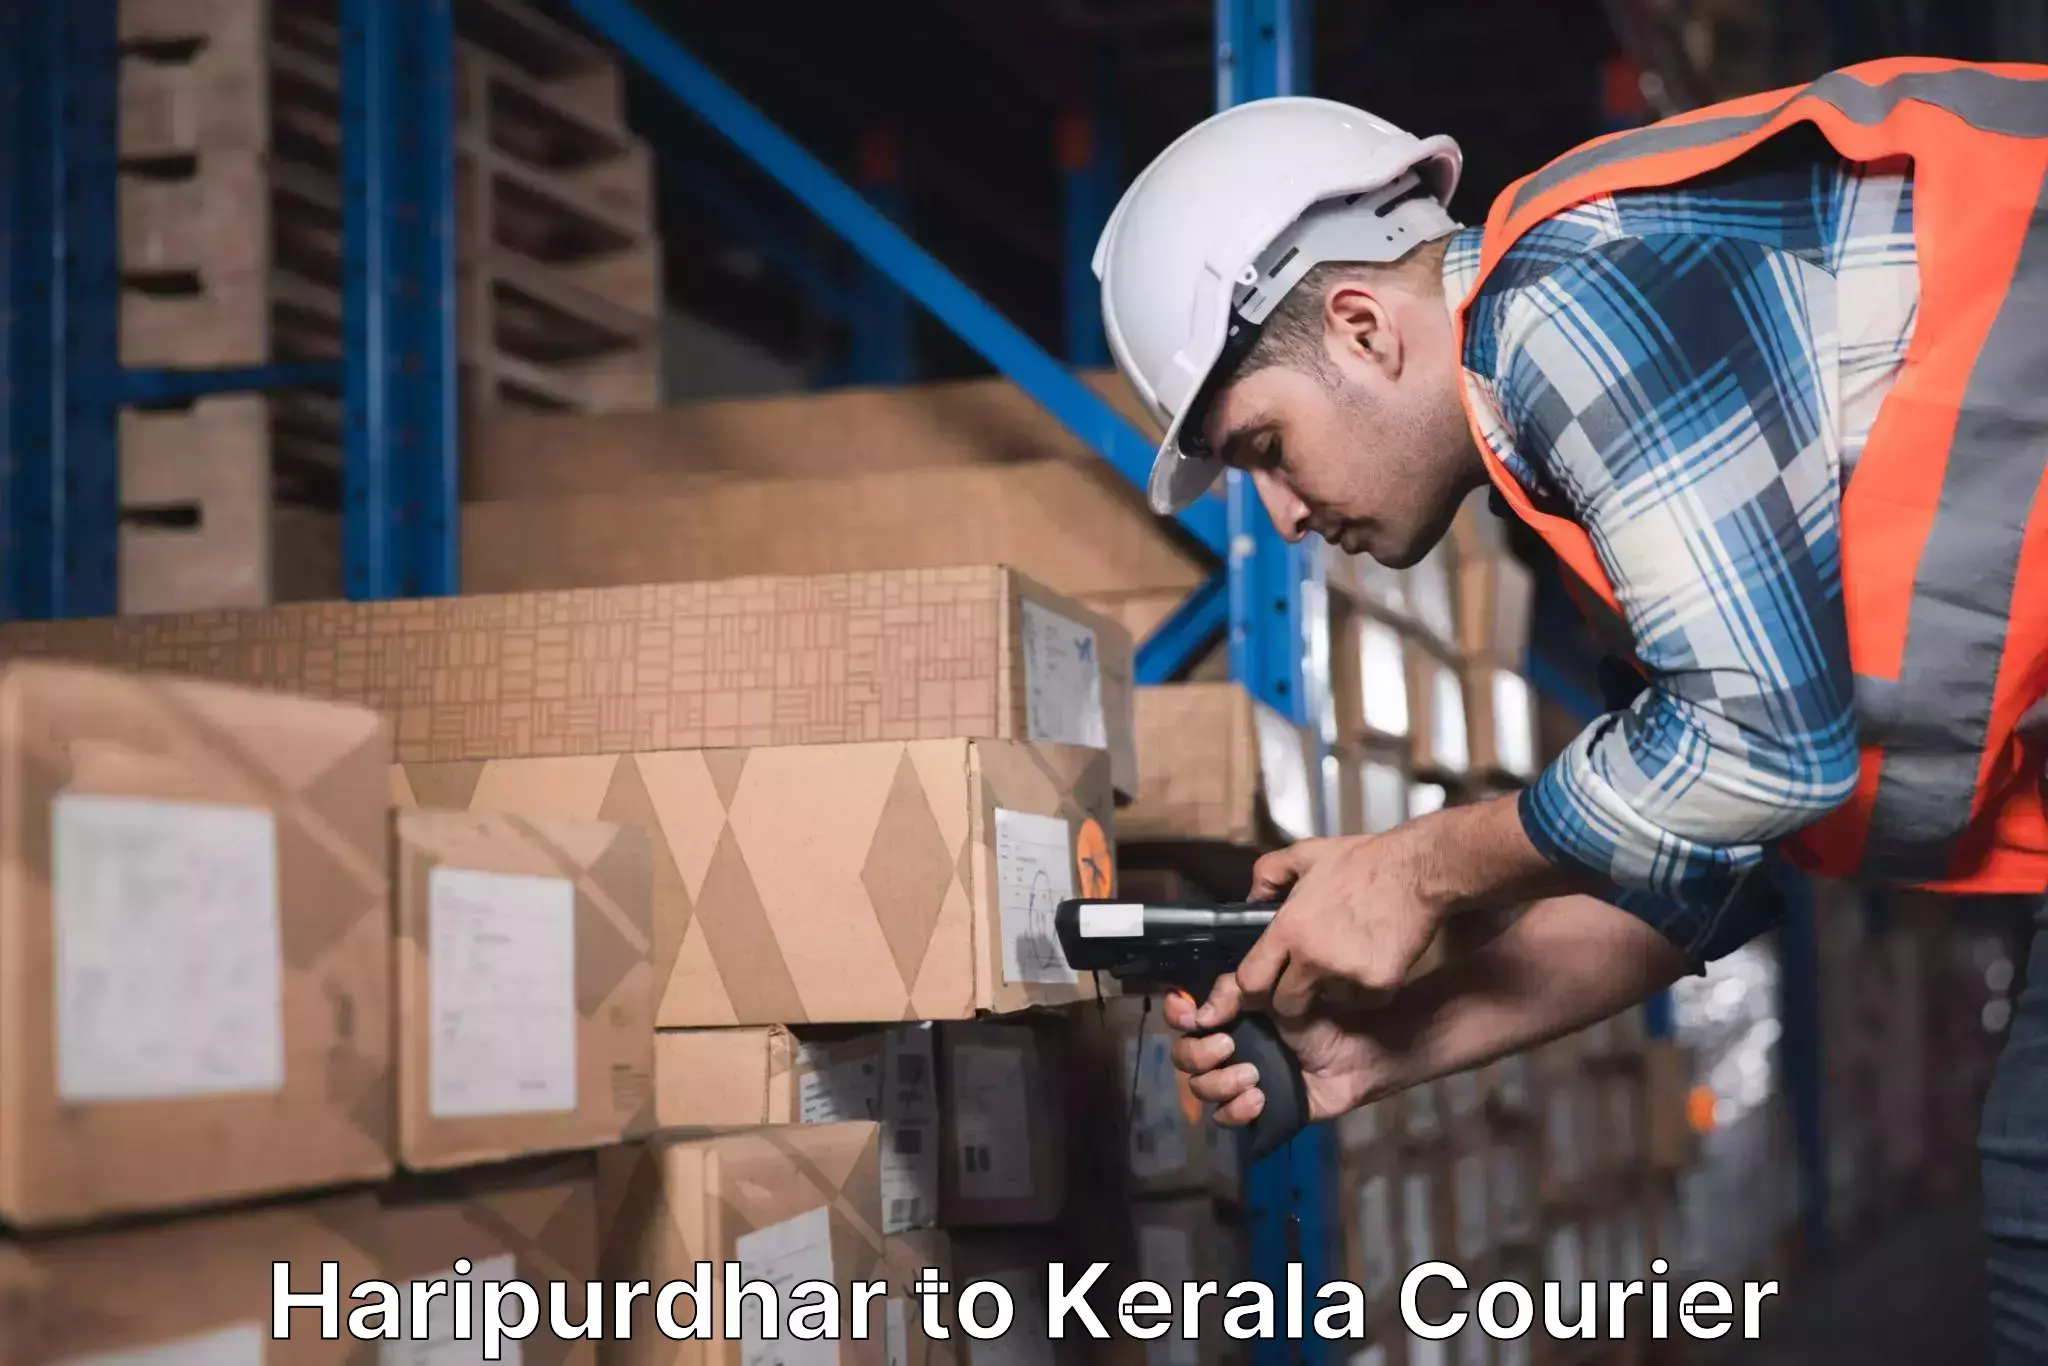 Courier service innovation Haripurdhar to Kerala